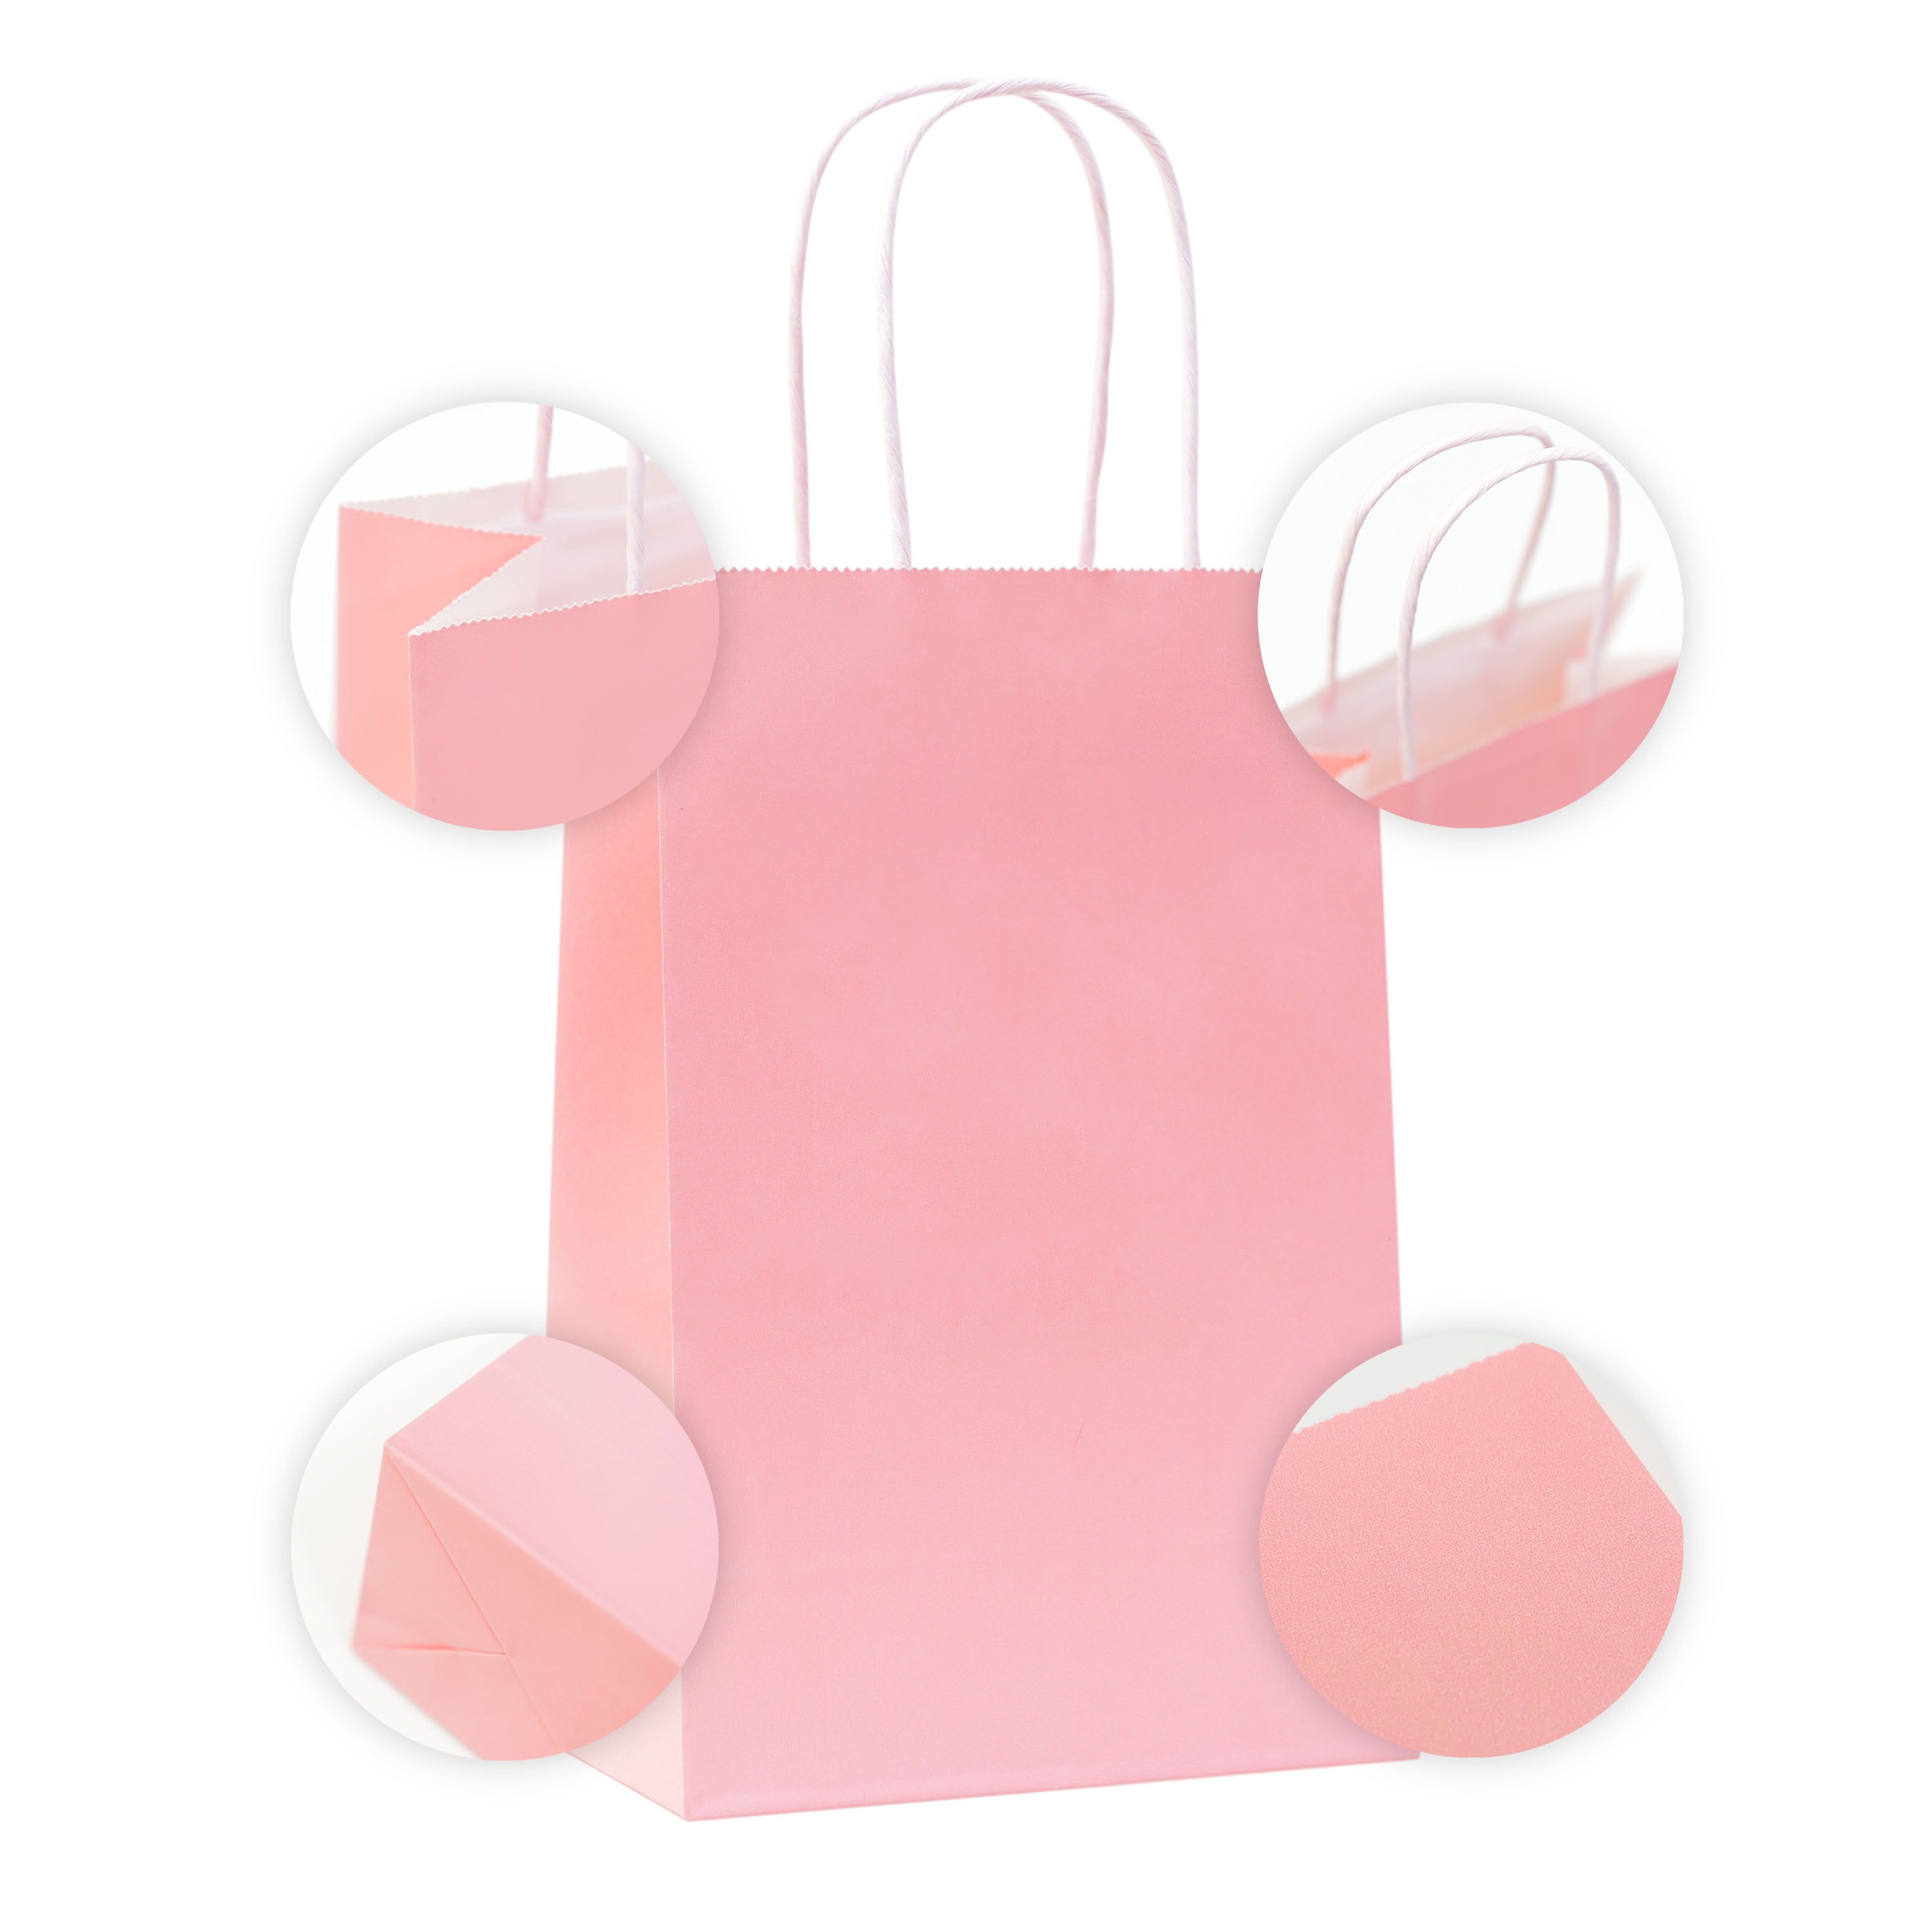 Pink 100 Pack 10.5x8.5x4.5 Inch Gift Bags,Paper Bags With Handles,Paper  Bags,Birthday Gift Bag,Gift Bags Bulk,Paper Lunch Bags,Party Bags,Gift Bags